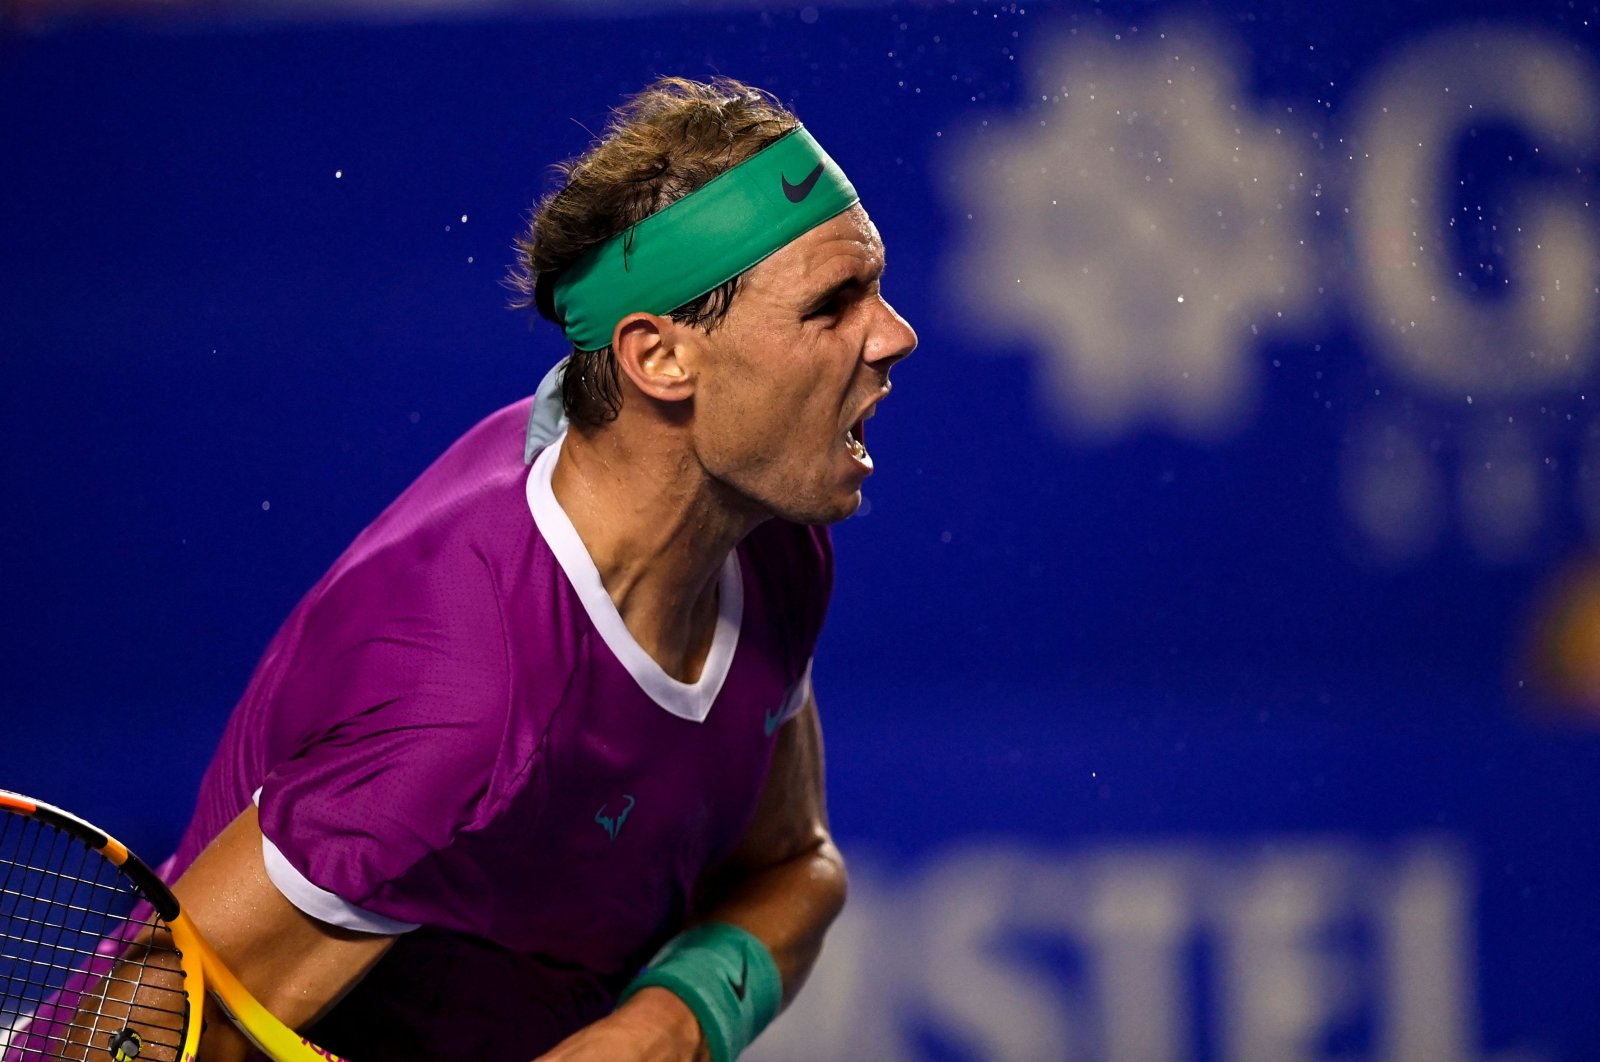 Rafael Nadal serves against Stefan Kozlov during their Mexican Open match, Acapulco, Mexico, Feb. 23, 2022 (AFP Photo)